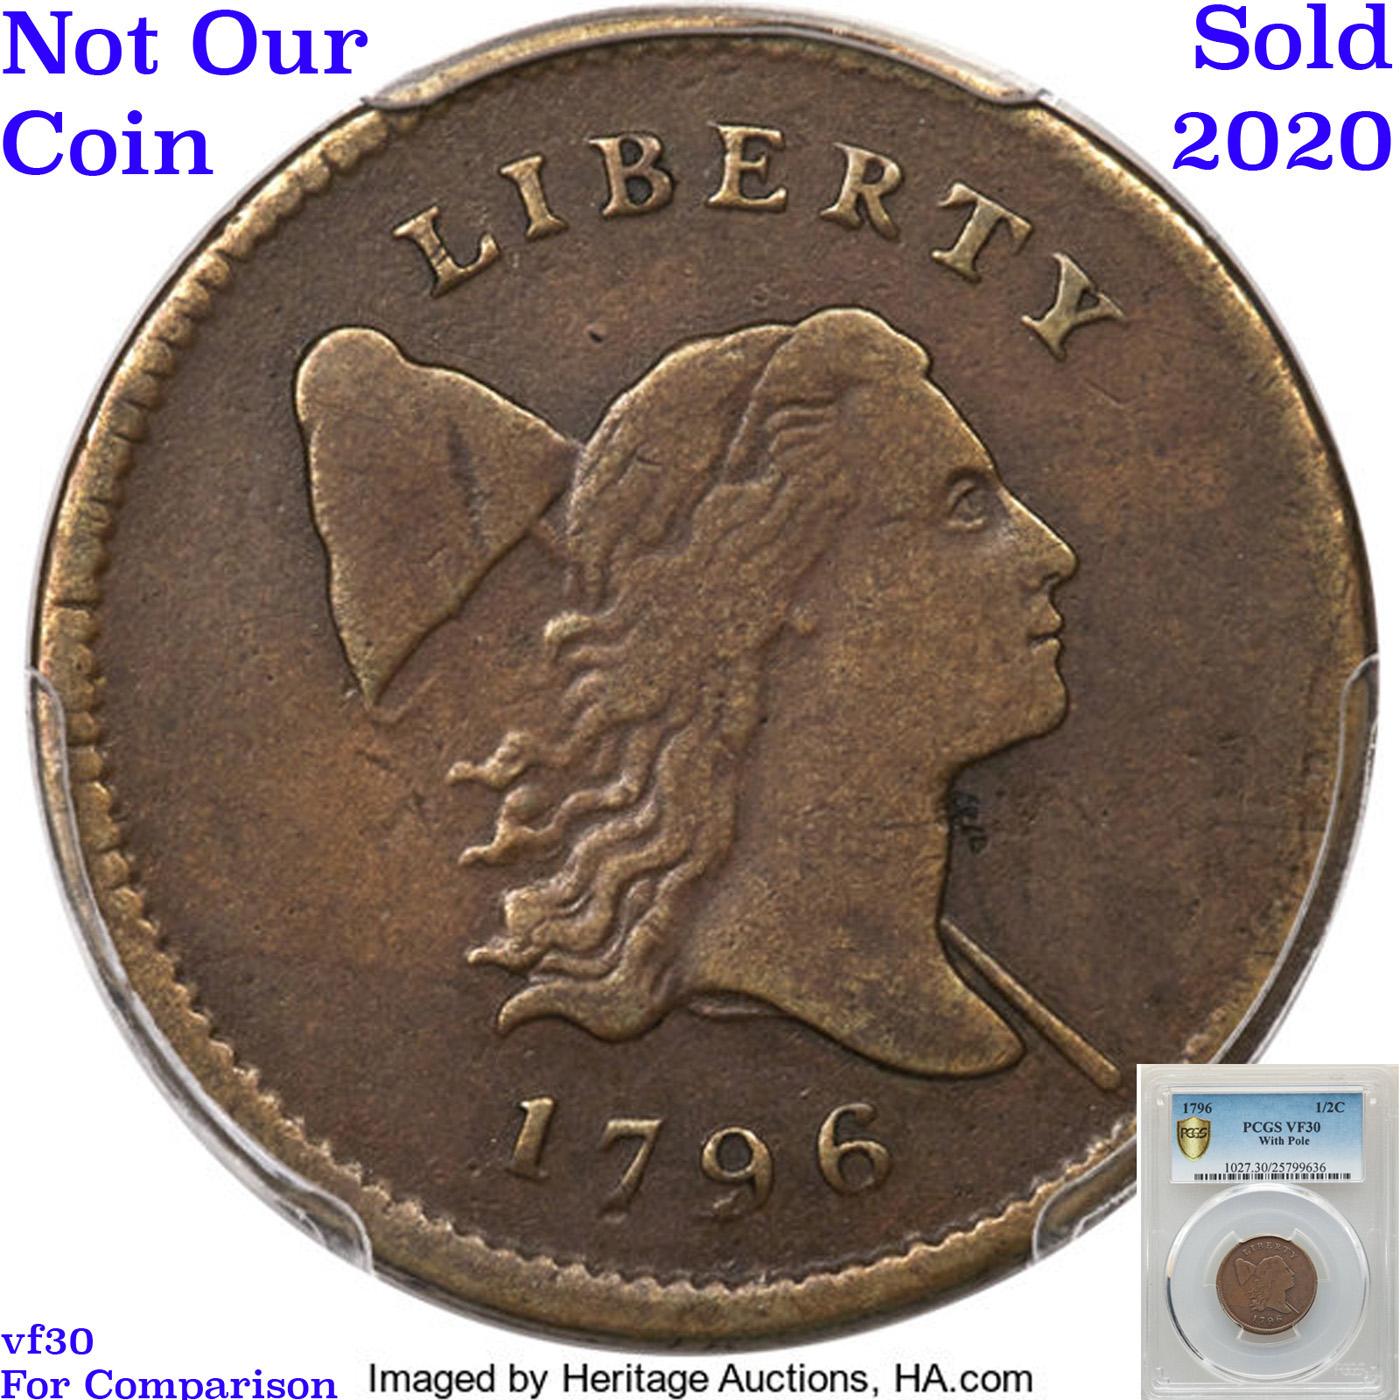 ***Auction Highlight*** 1796 W/ Pole Liberty Cap half cent 1/2c Graded vf35 details By SEGS (fc)